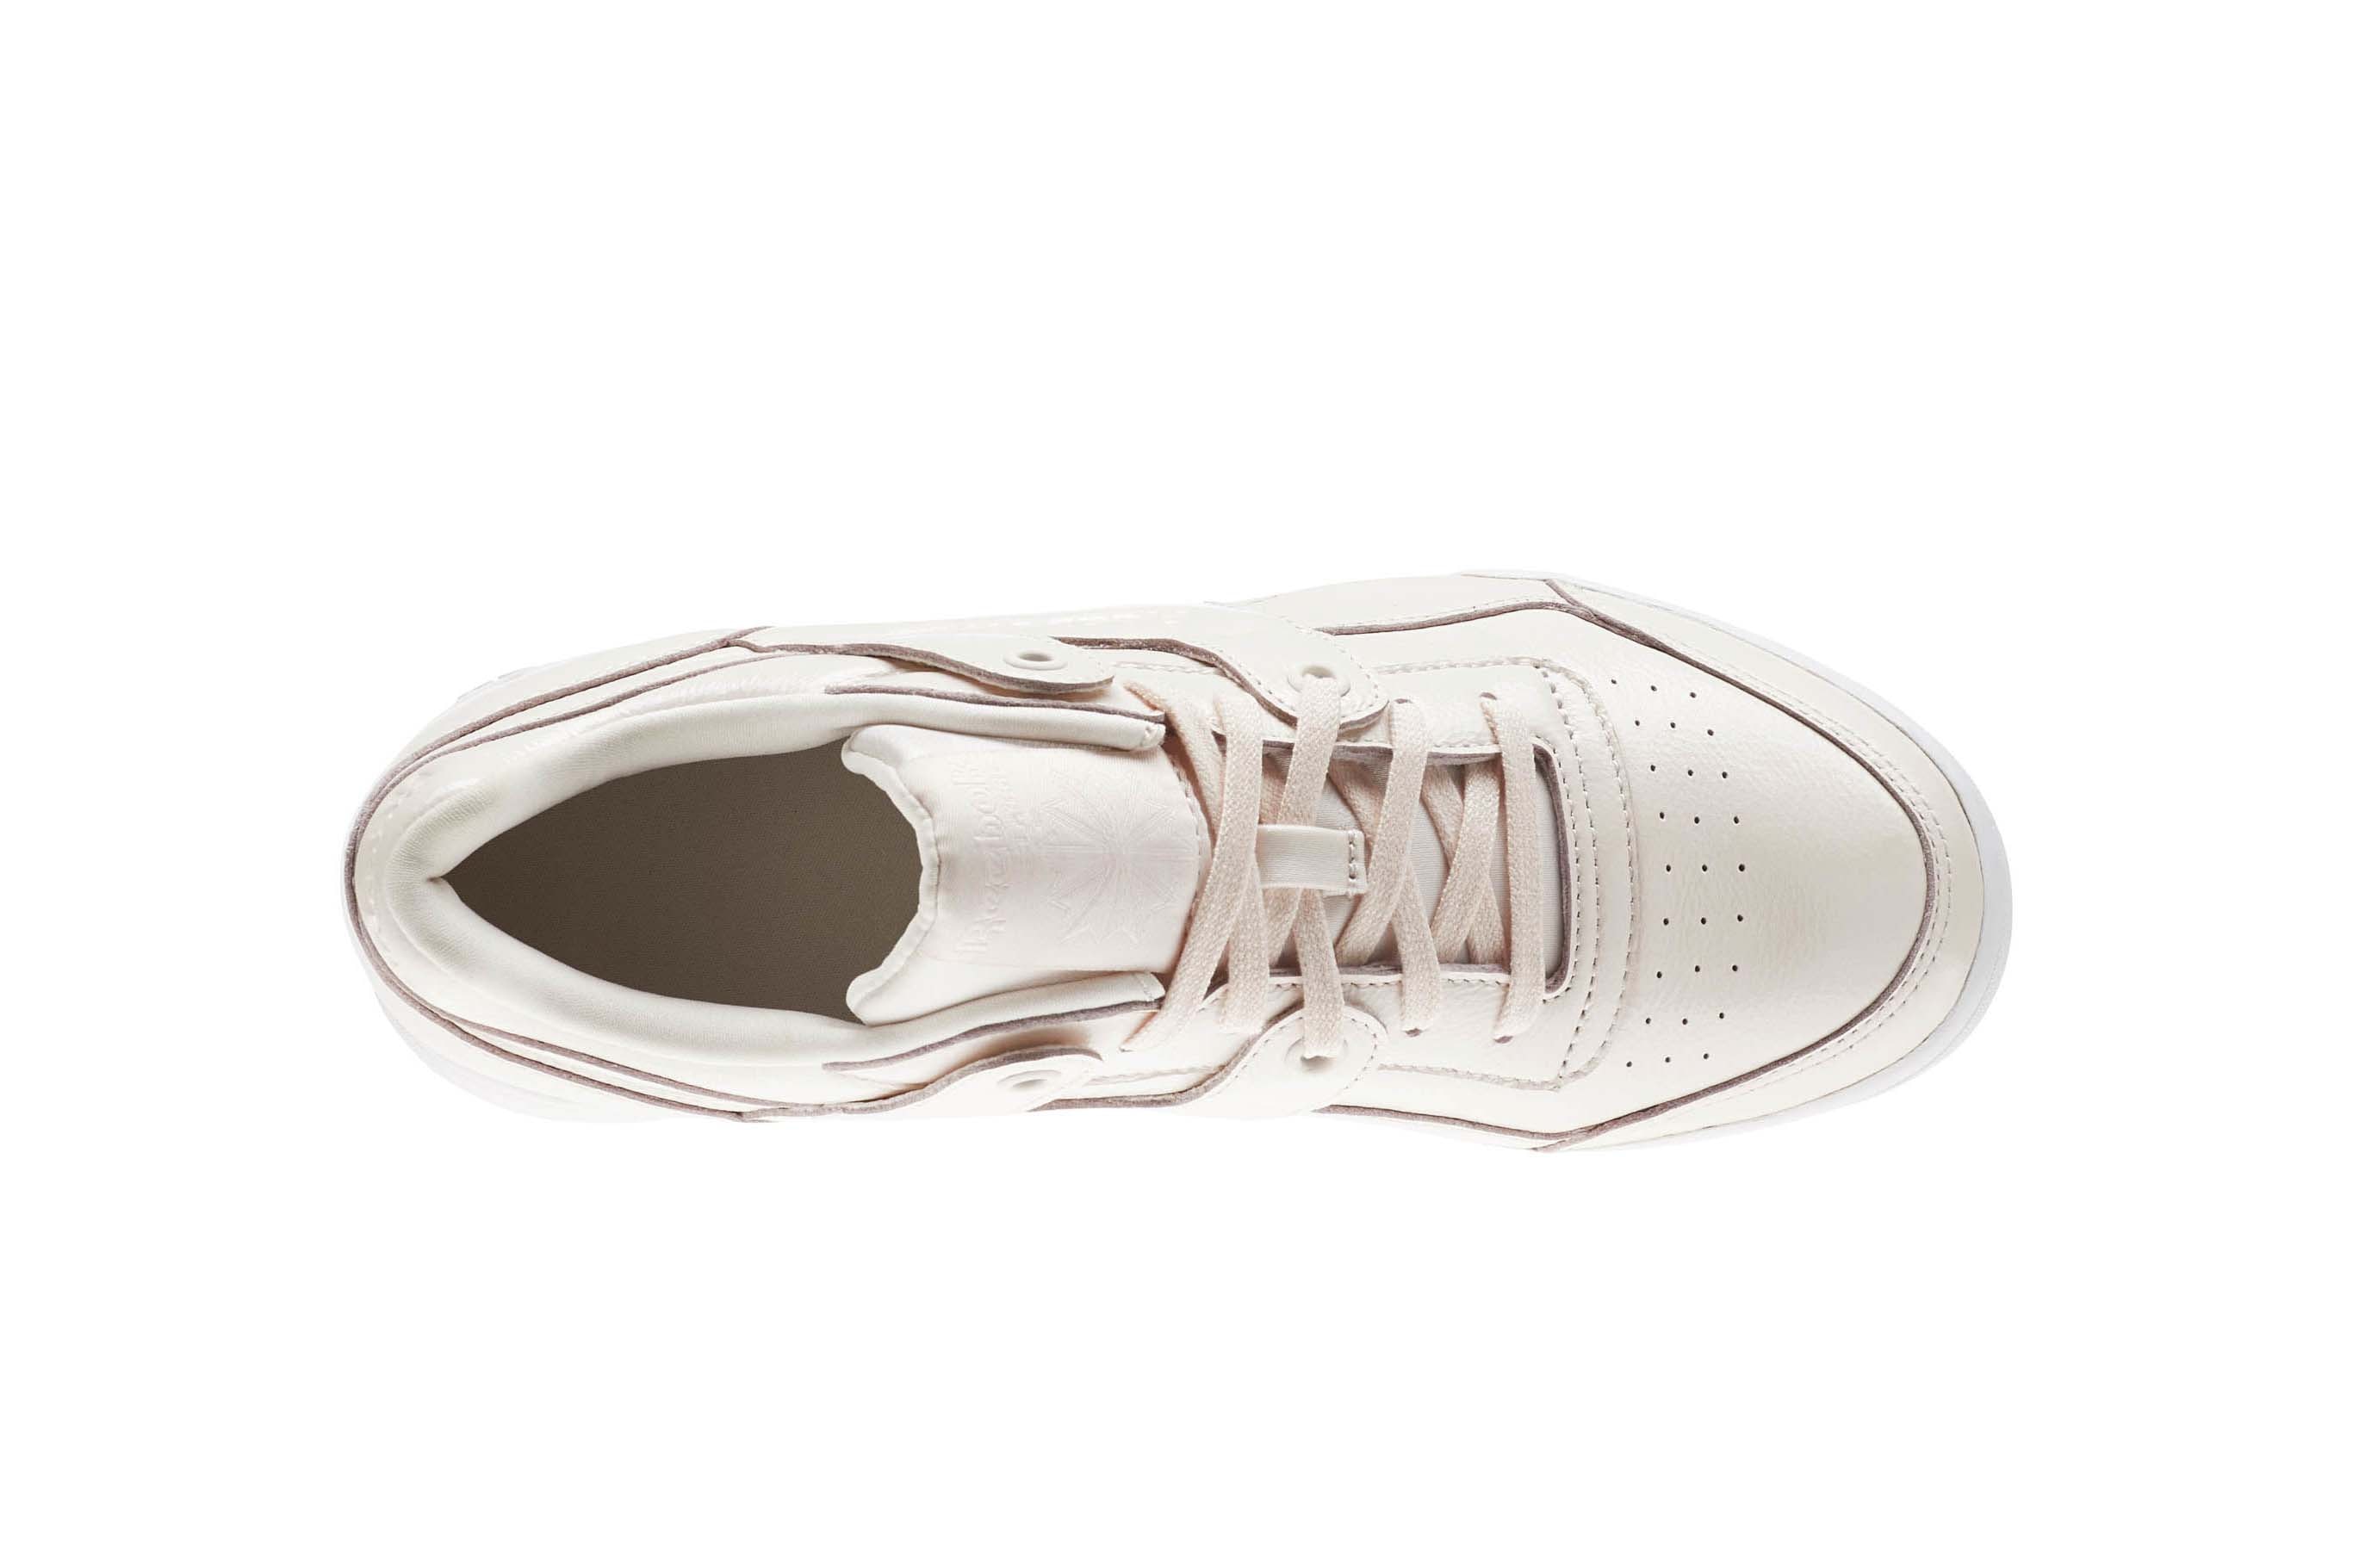 Reebok Workout Plus in "Pale Pink/White" Sneaker Shoe Iridescent Pearl Shine Classic Silhouette